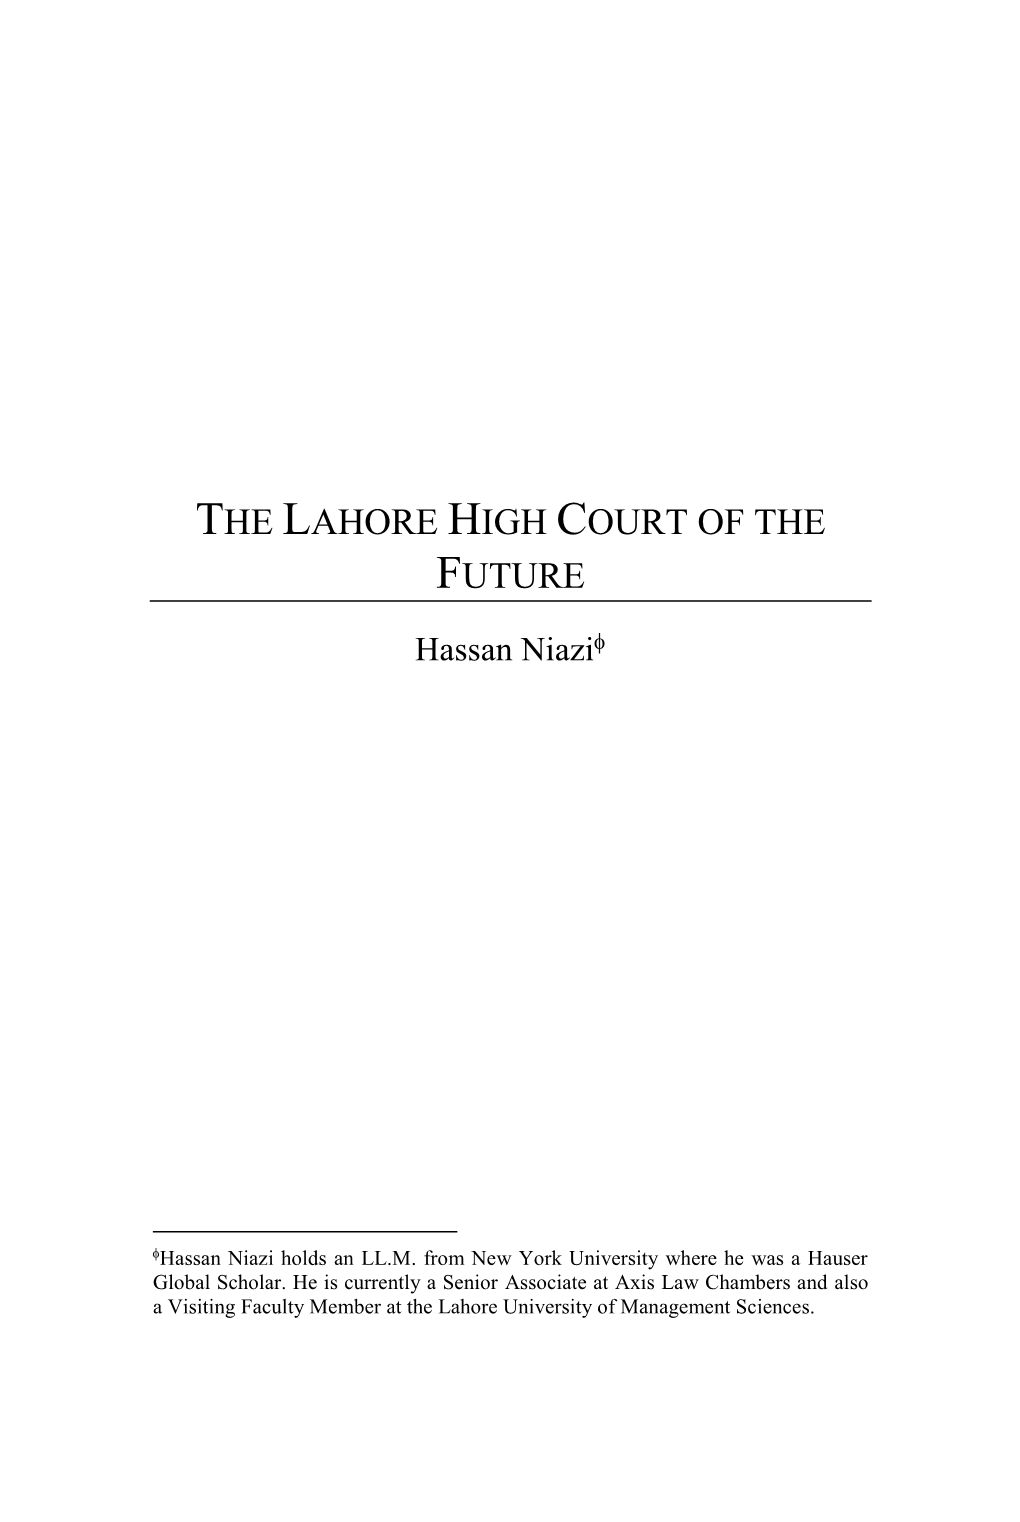 The Lahore High Court of the Future